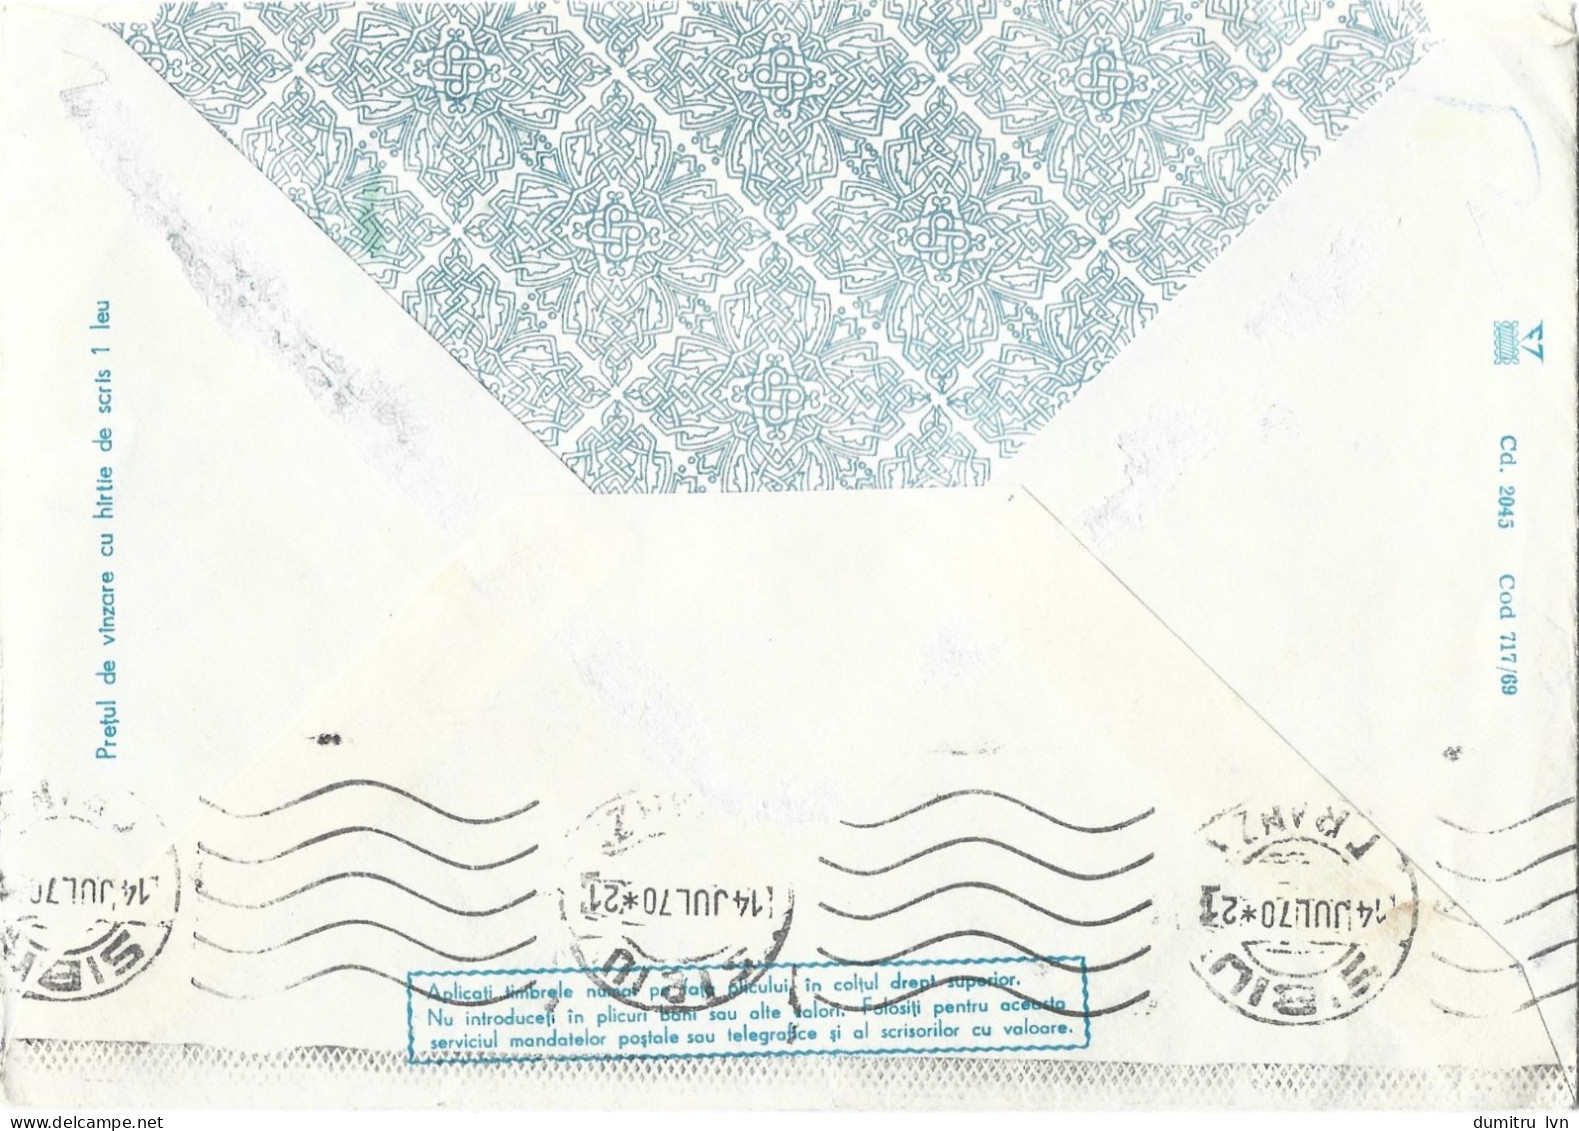 ROMANIA 1969 WINTER LANDSCAPE, SKIERS, CIRCULATED ENVELOPE, COVER STATIONERY - Ganzsachen